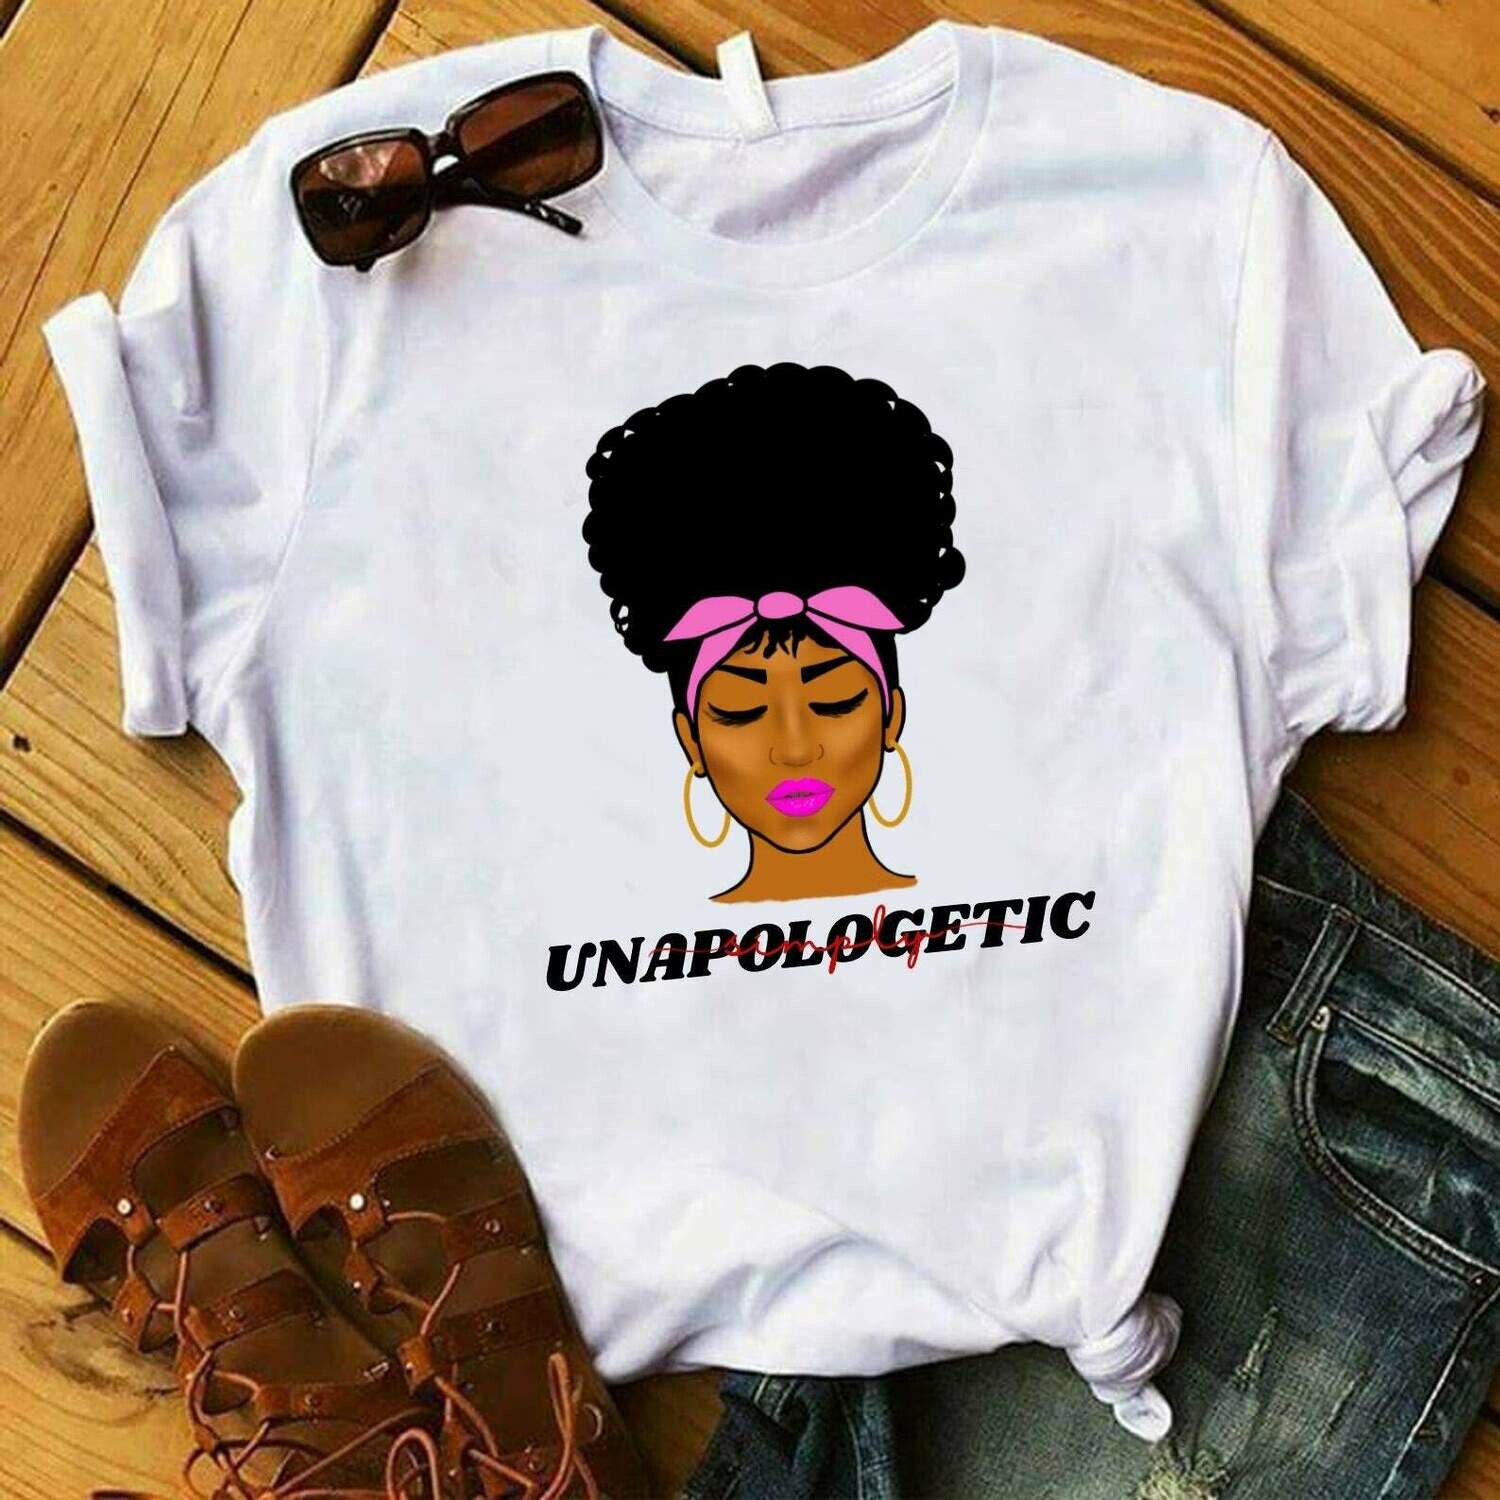 Simply Unapologetic T-Shirt for Women – Creativart Studio – Colored Pencils  Art – Watercolor Painting